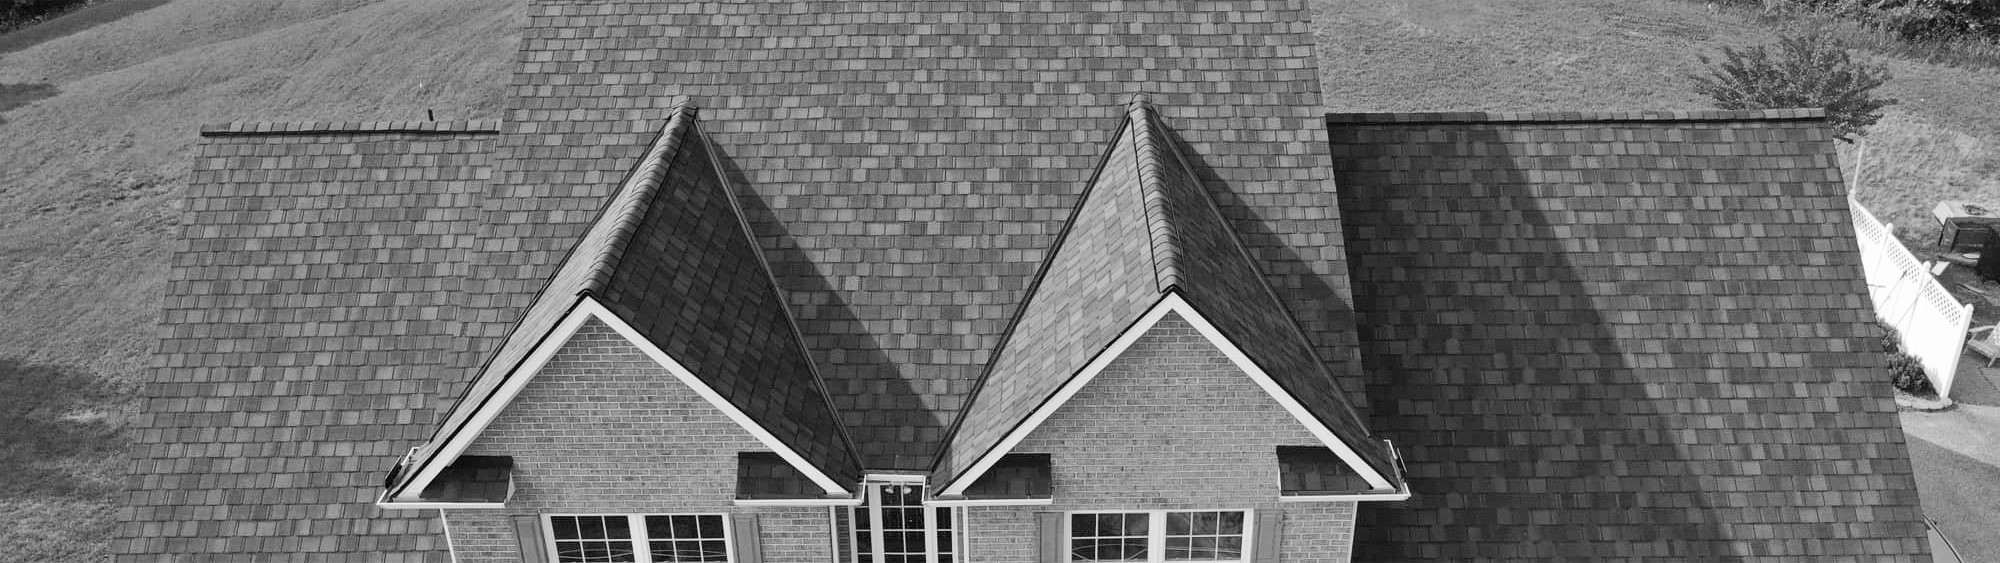 Huber Heights Residential Roofing Company